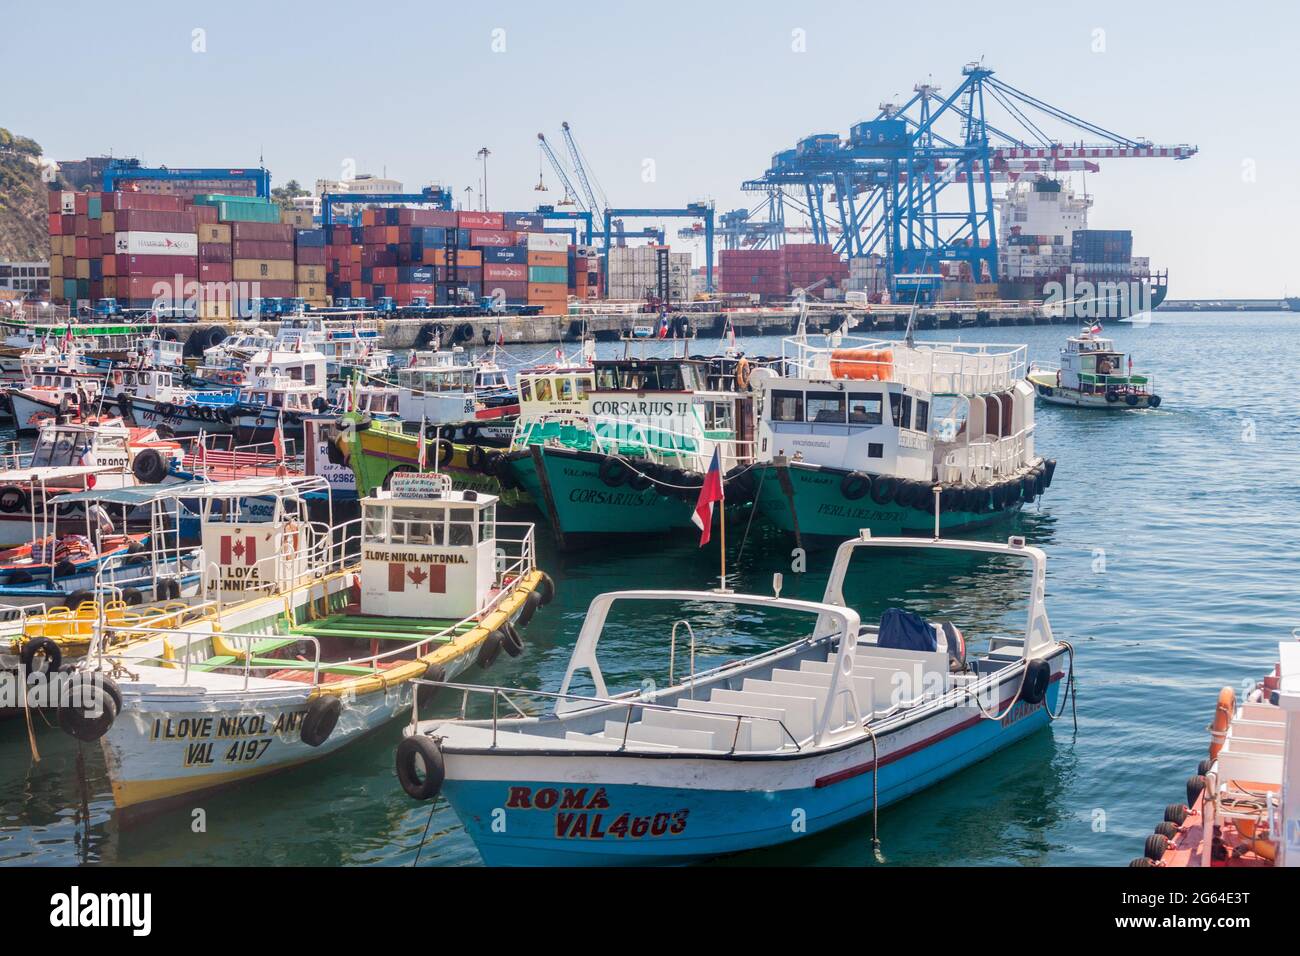 VALPARAISO, CHILE - MARCH 29, 2015: Boats and cranes in a harbor of Valparaiso, Chile Stock Photo